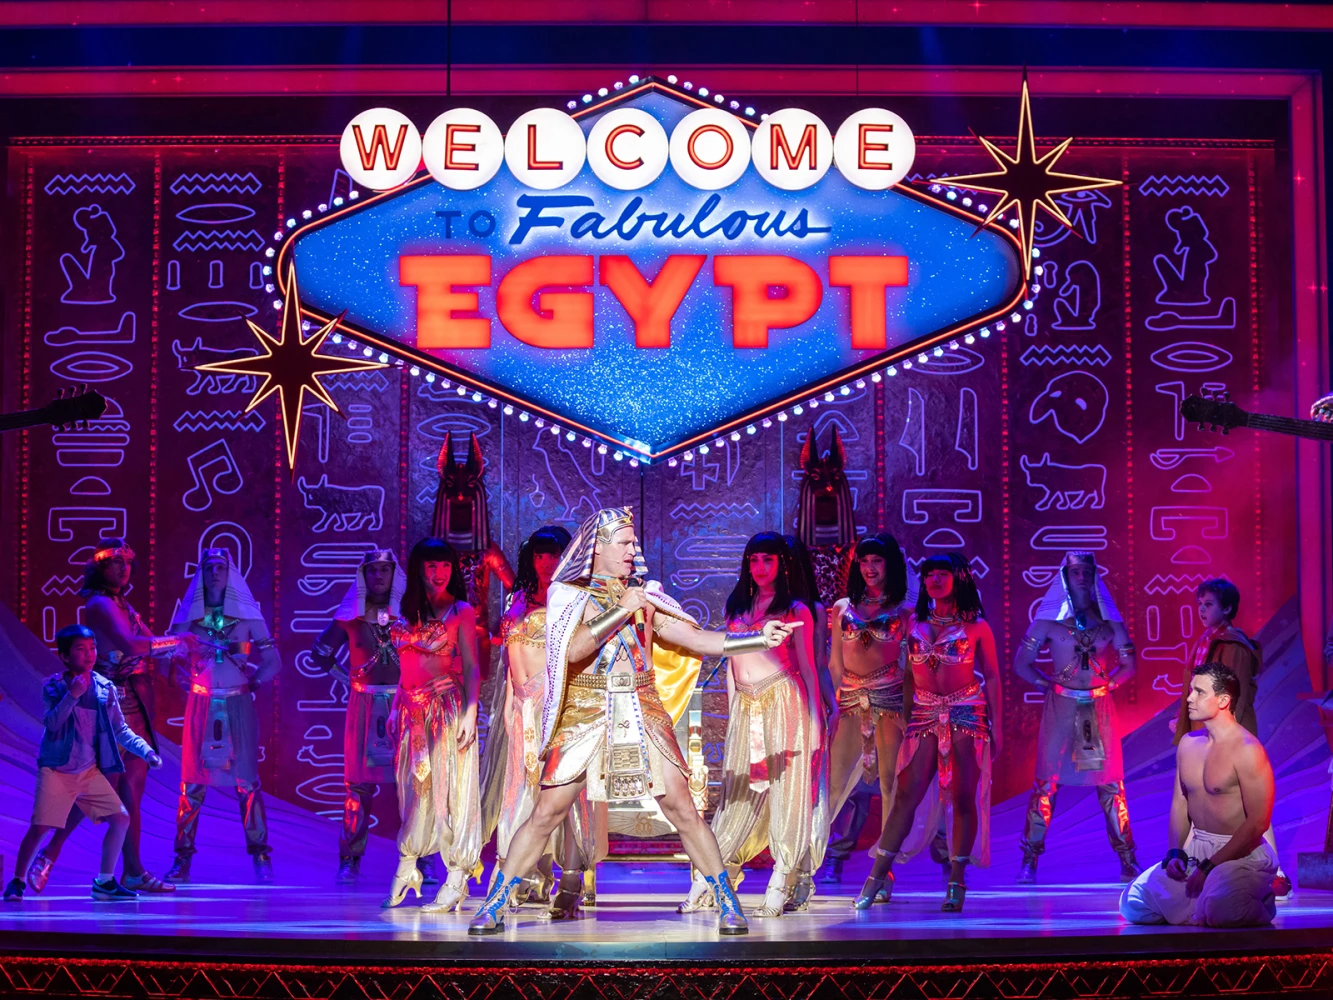 Joseph and the Amazing Technicolor Dreamcoat: What to expect - 6